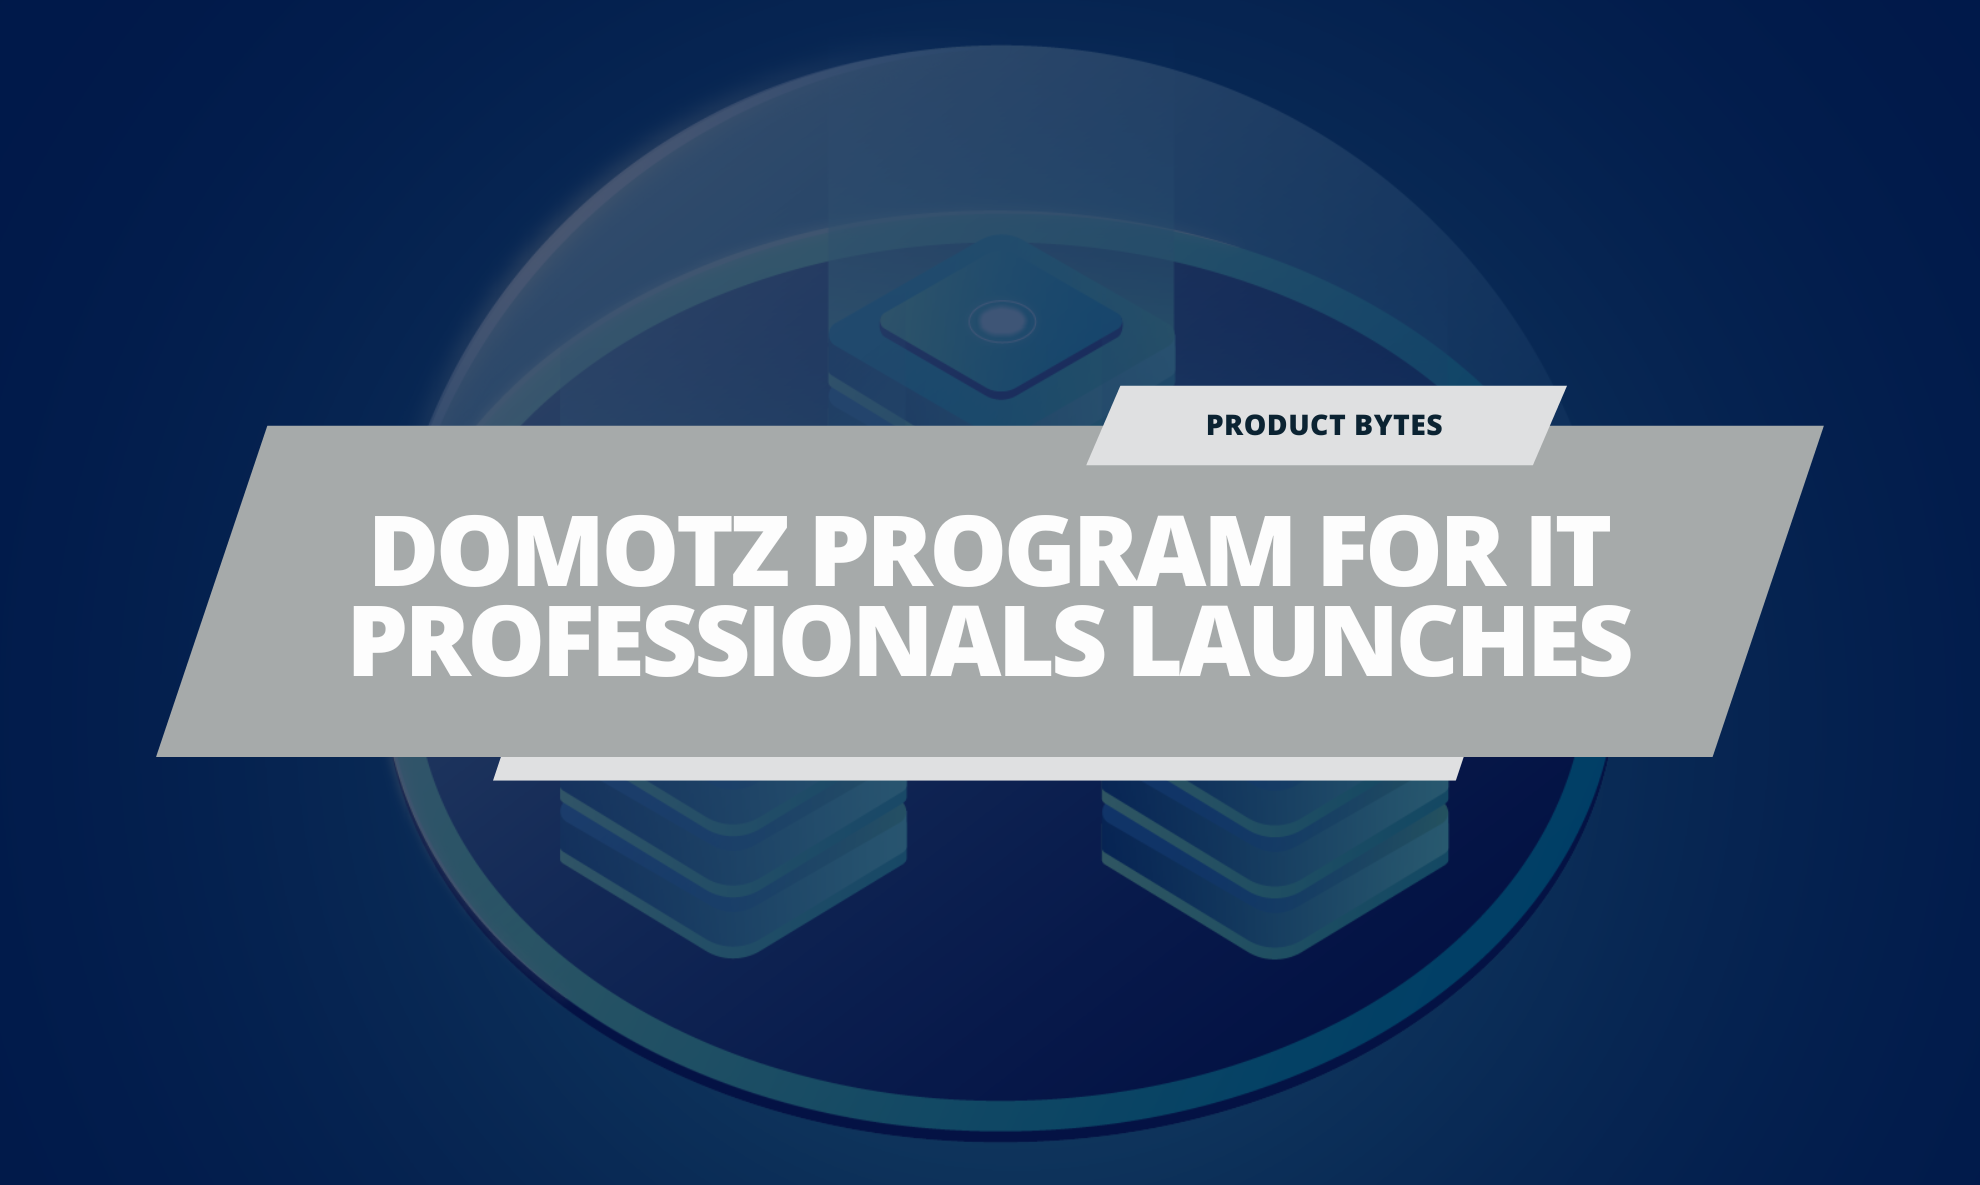 Powered By Domotz Program for IT Professionals Launches